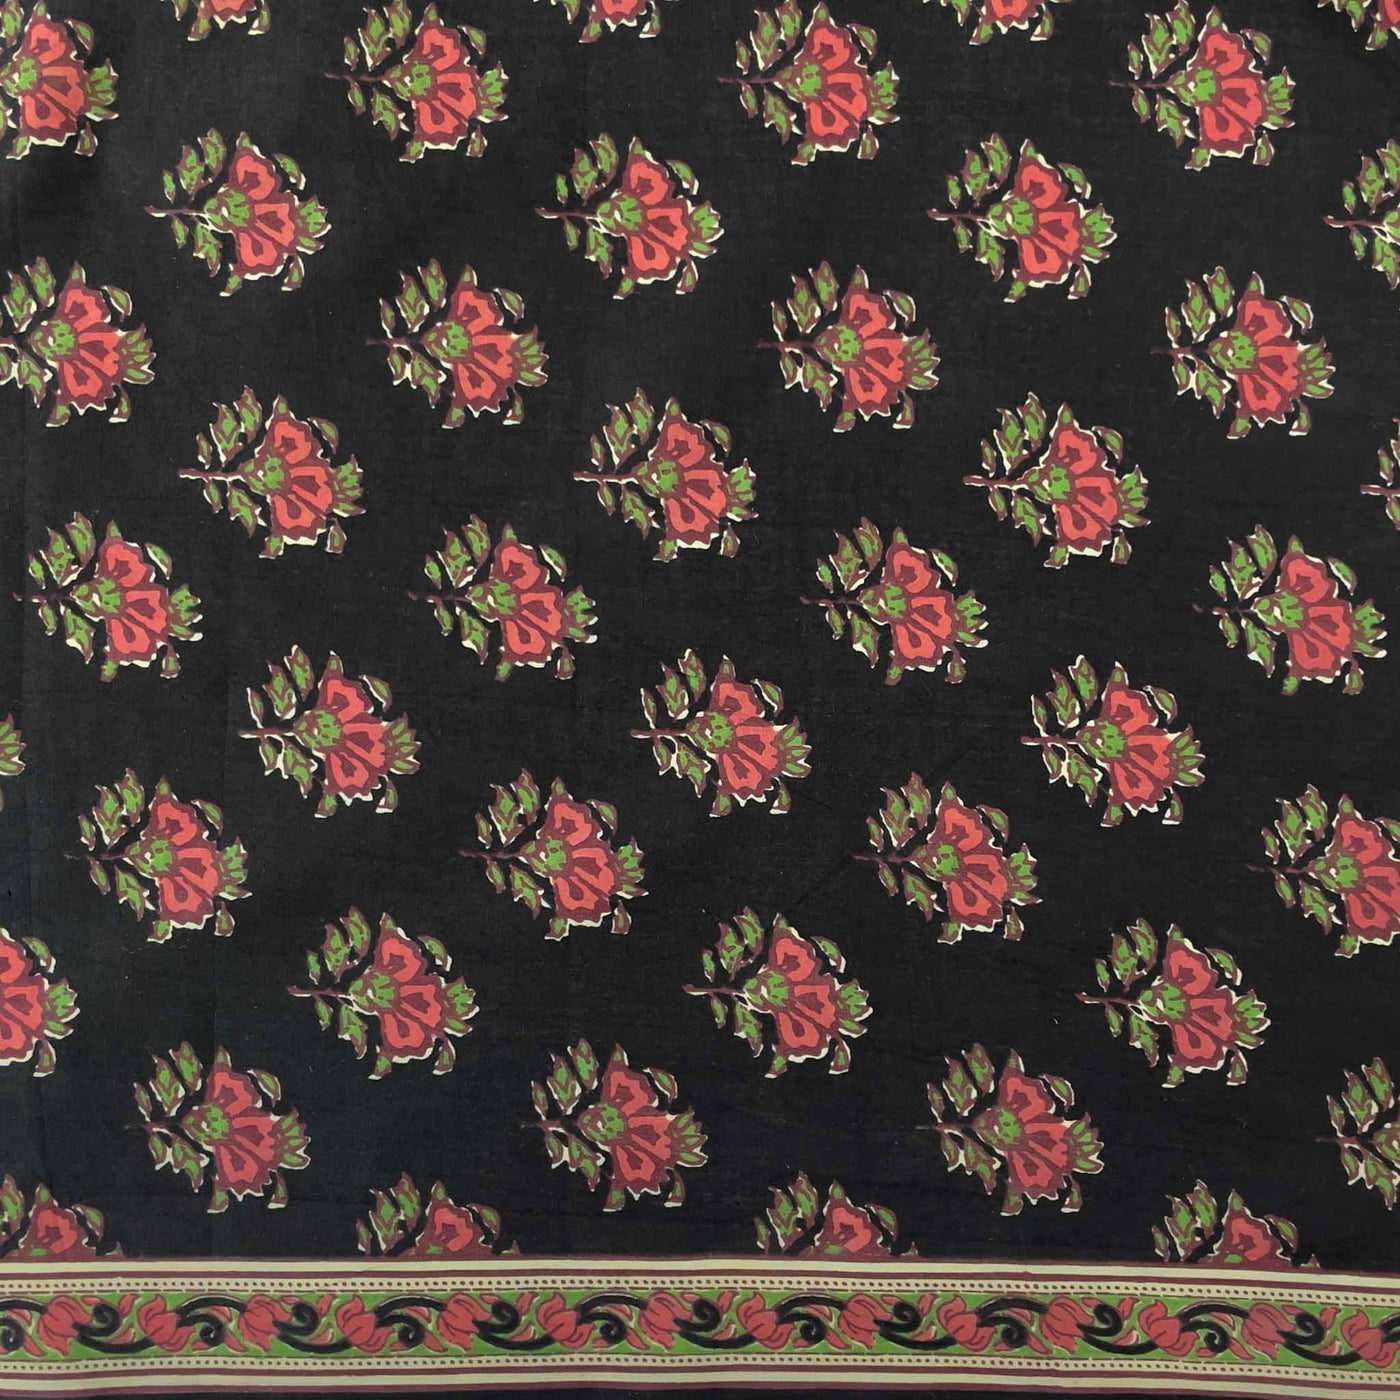 Fabric Pandit Cut Piece (CUT PIECE) Black and Peach Egyptian Floral Hand Block Printed Pure Cotton Fabric Width (43 inches)